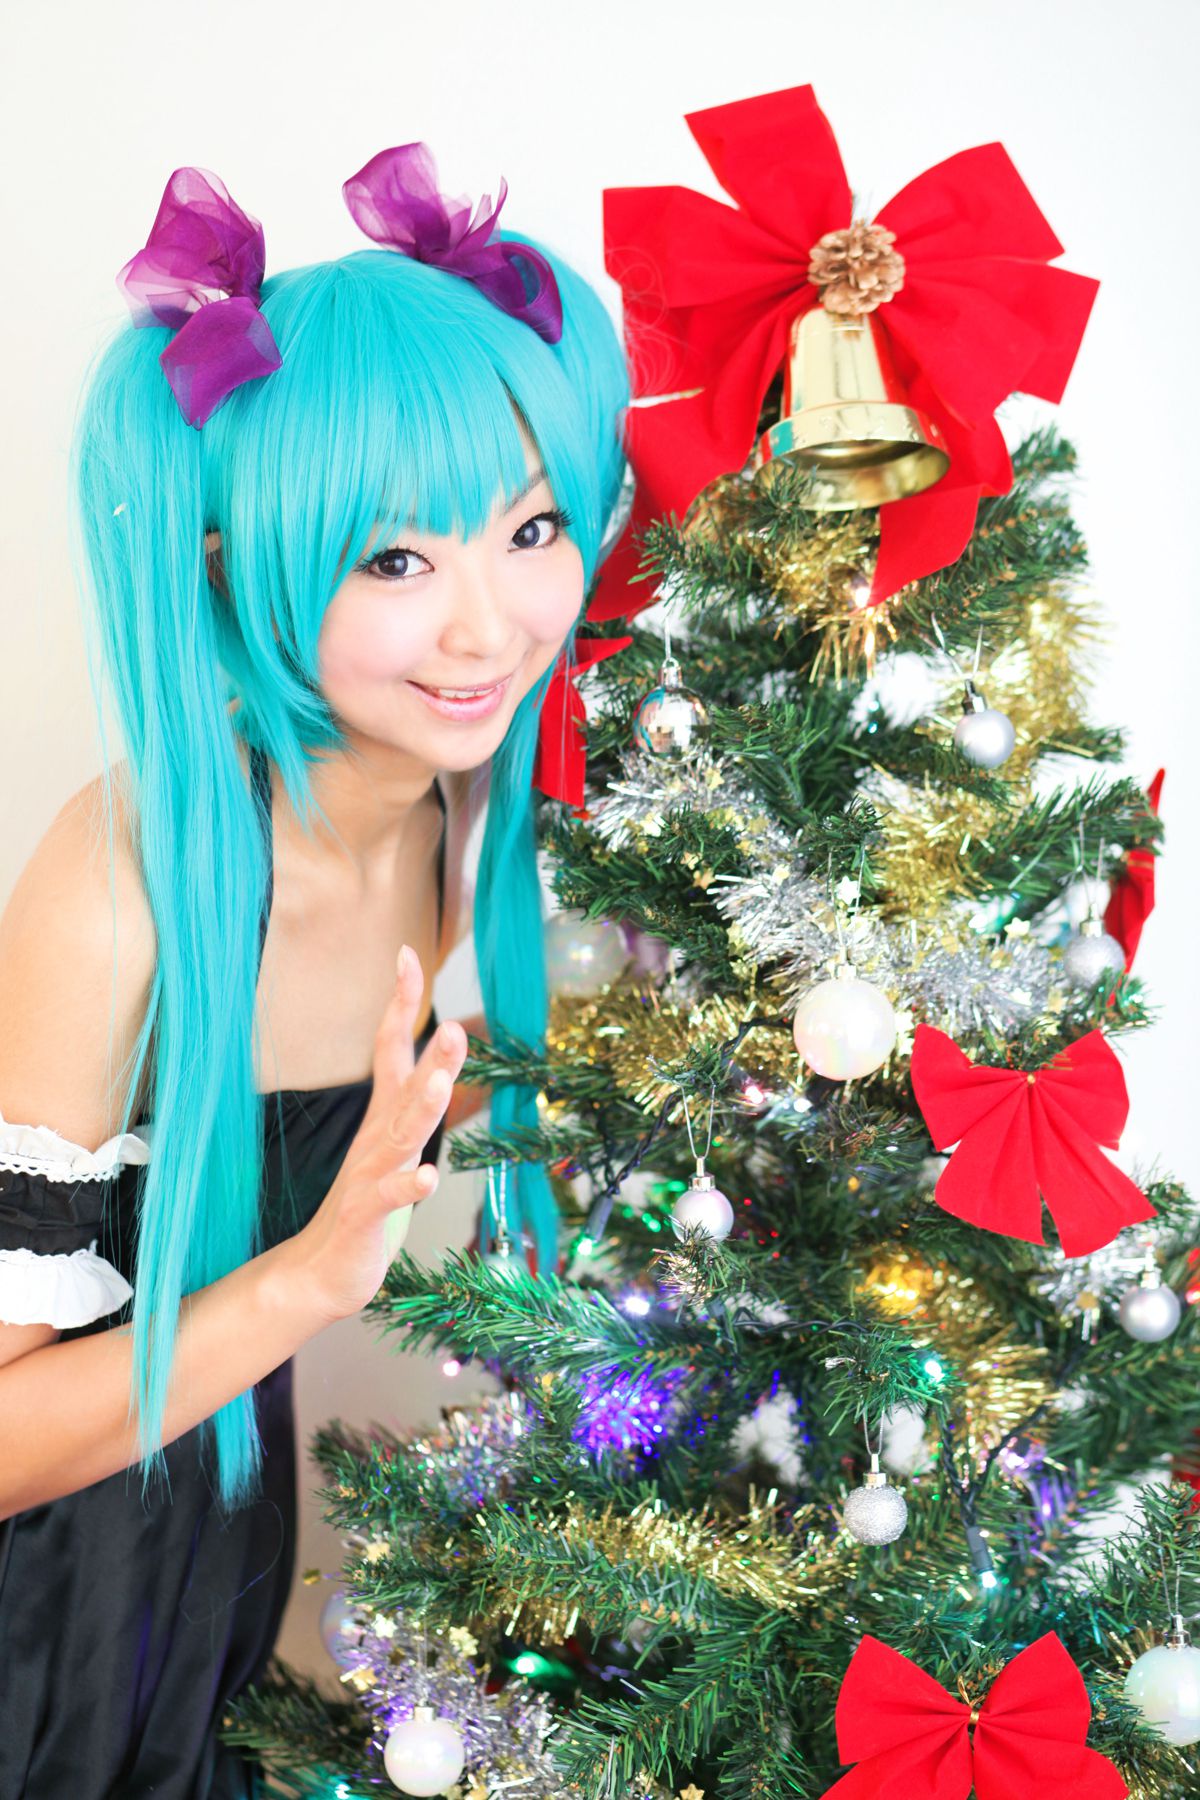 [Cosplay] Necoco as Hatsune Miku from Vocaloid [170P]